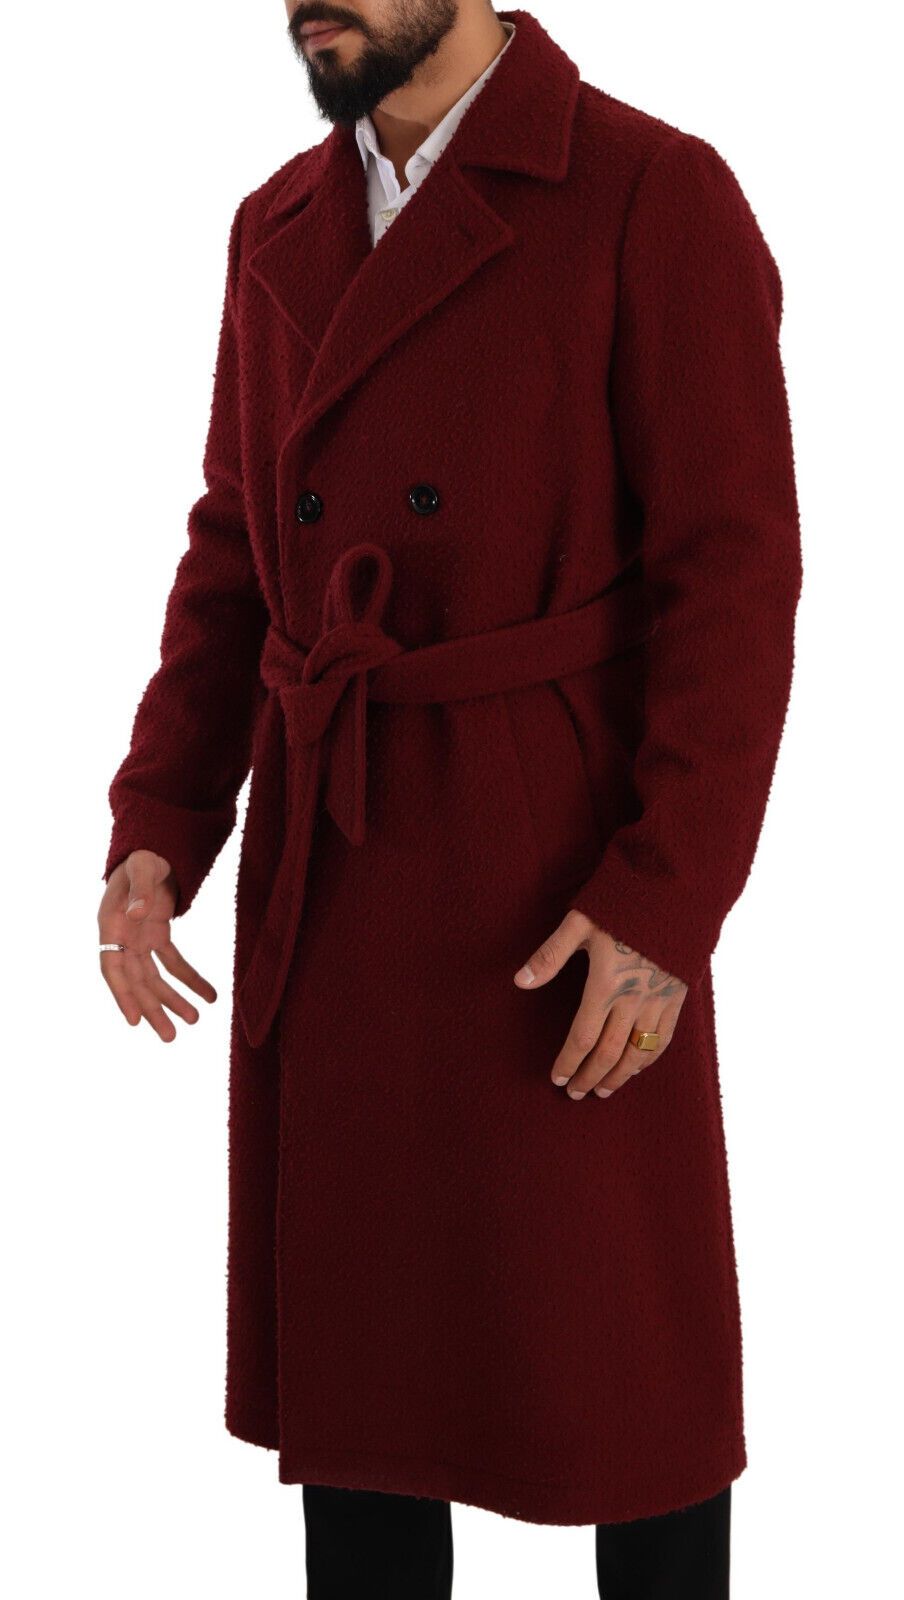 Stunning Double Breasted Wool Overcoat